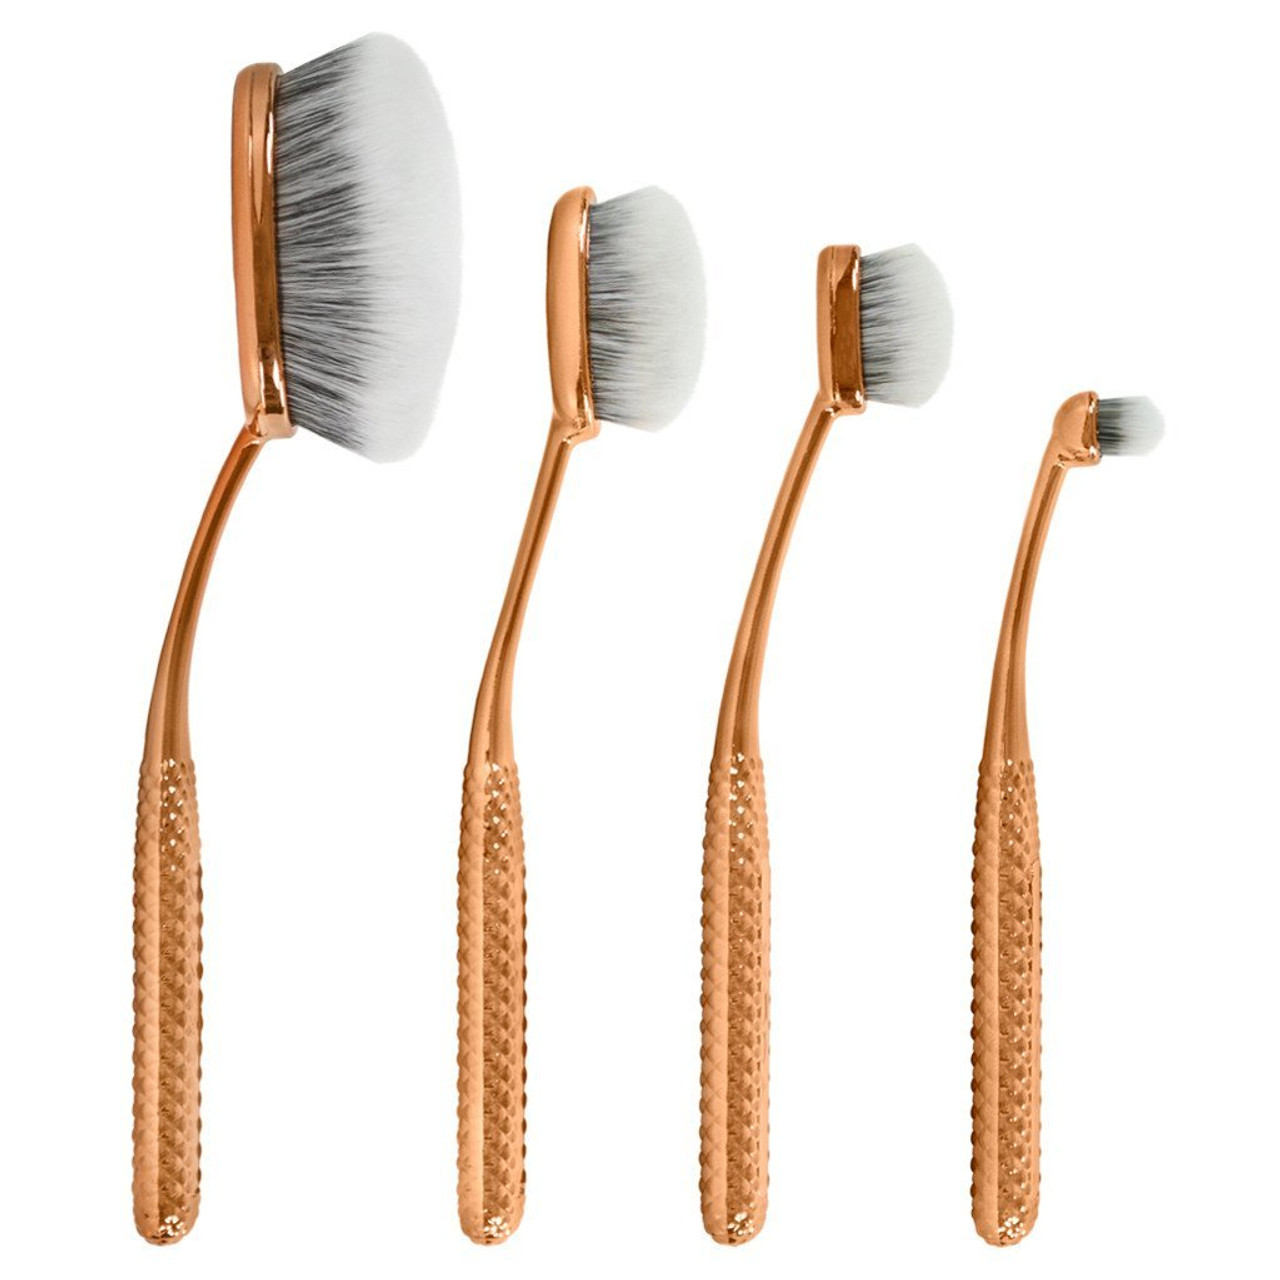 MODA Full Size Face Perfecting 4pc Oval Makeup Brush Set, Includes -  Foundation, Contour, Detail Contour, and Concealer Brushes (Prismatic)